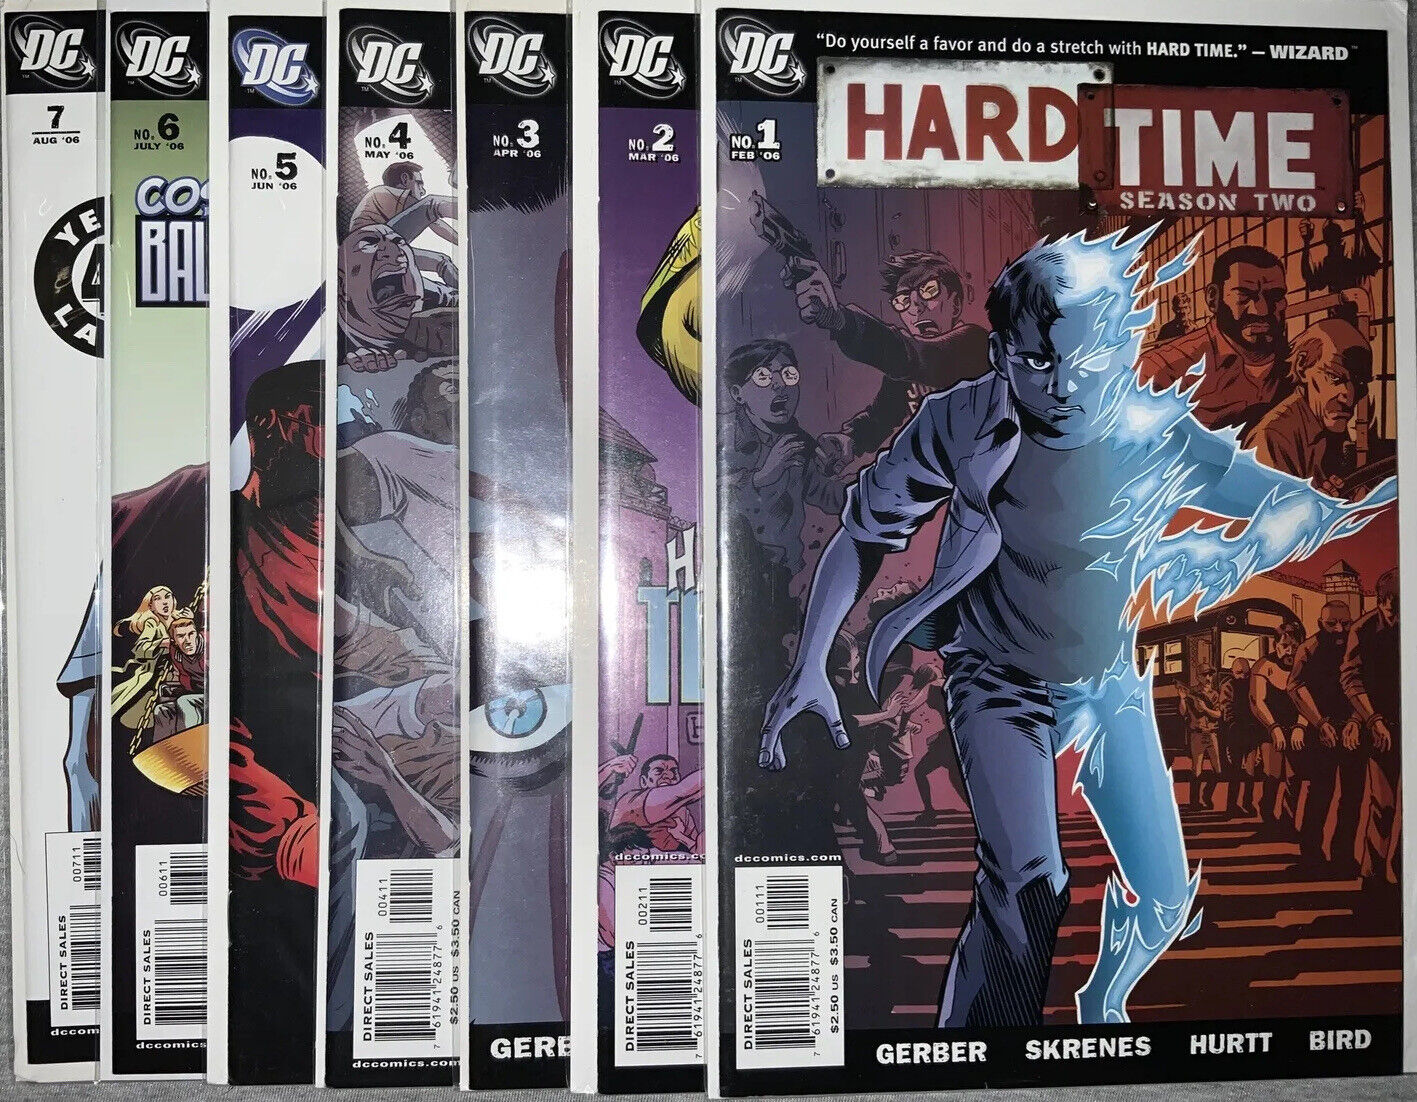 Hard Time Season Two, Issue #1-7 (DC Comics, 2006) COMPLETE